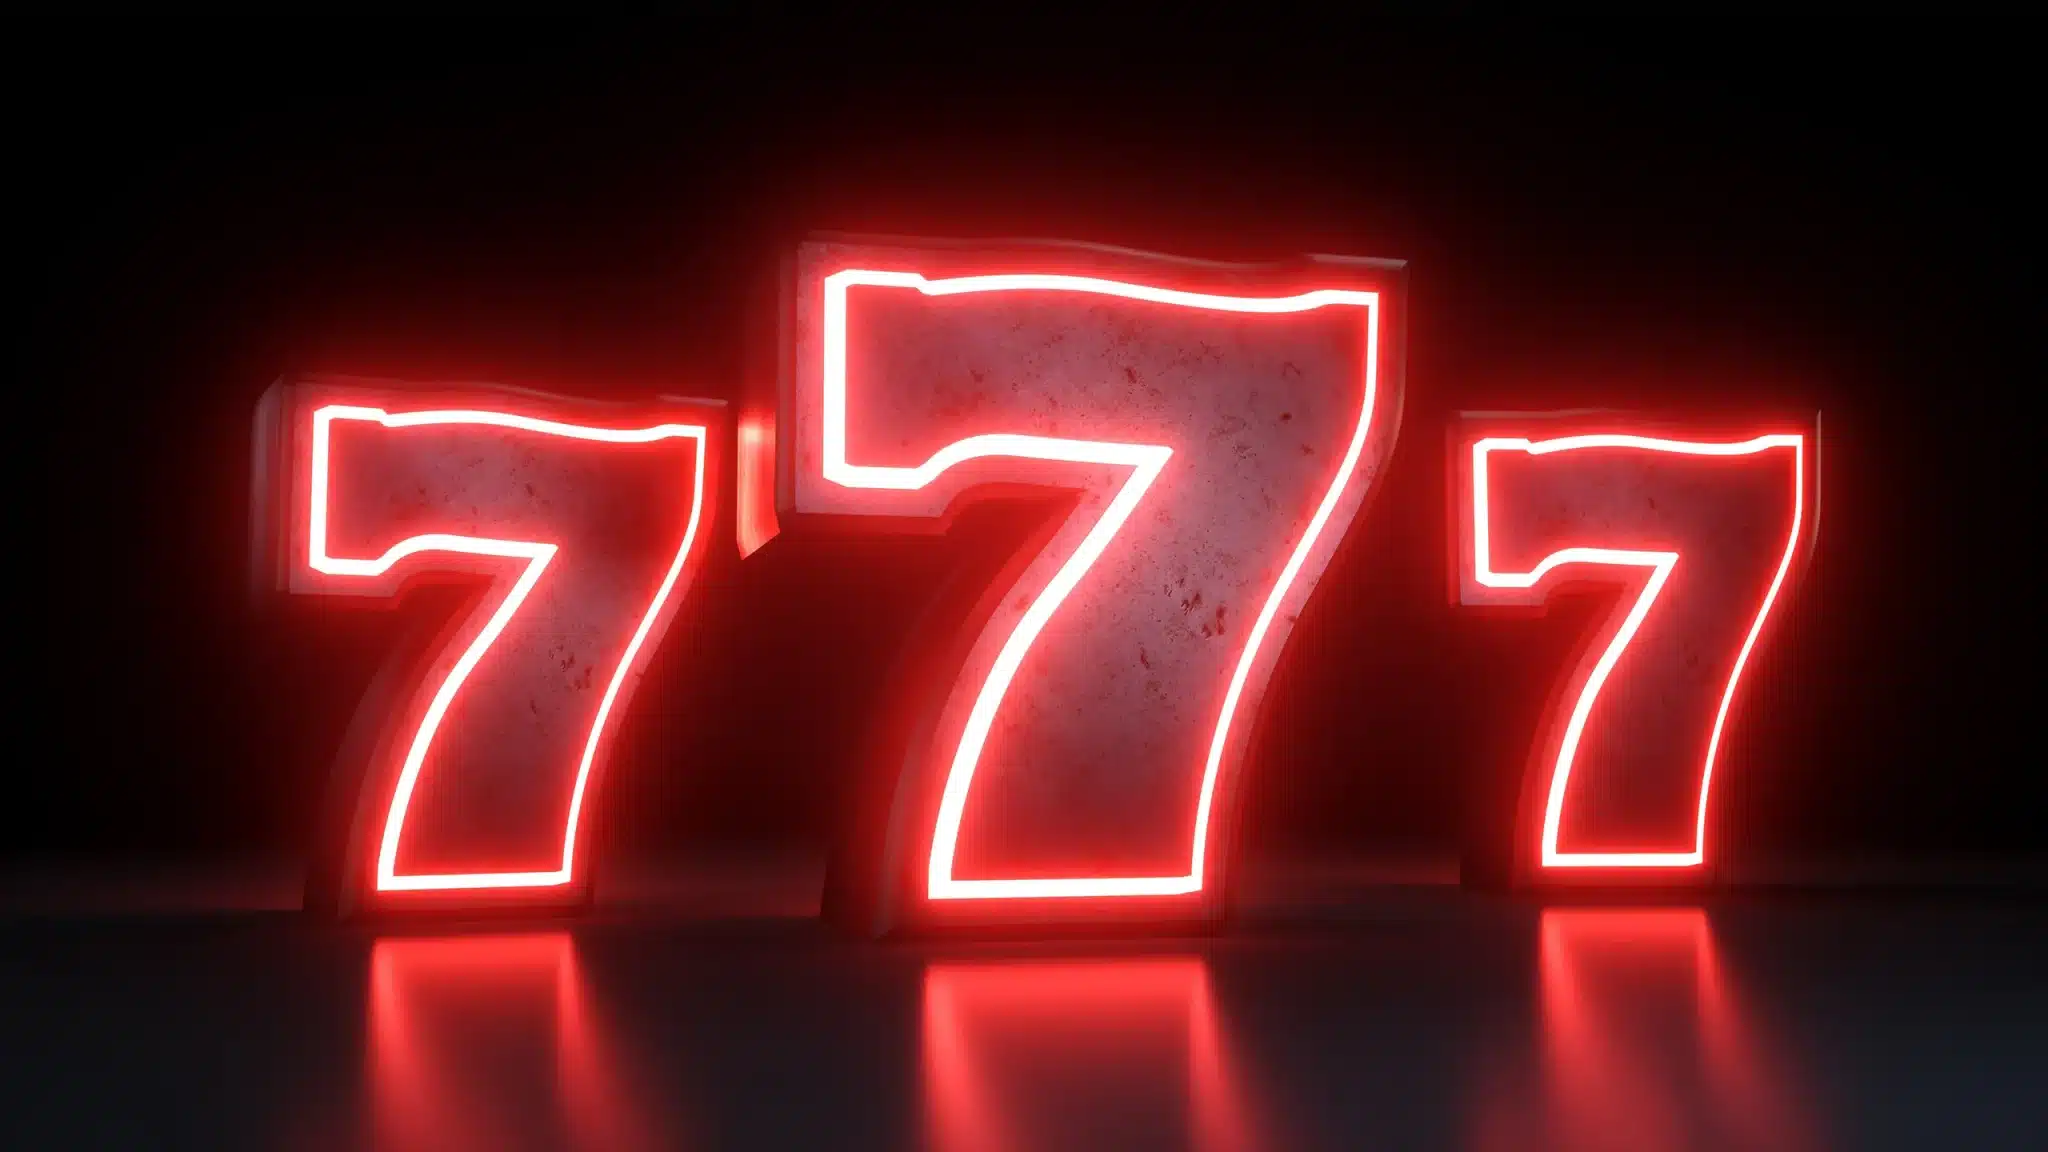 777 signification flamme jumelle 1